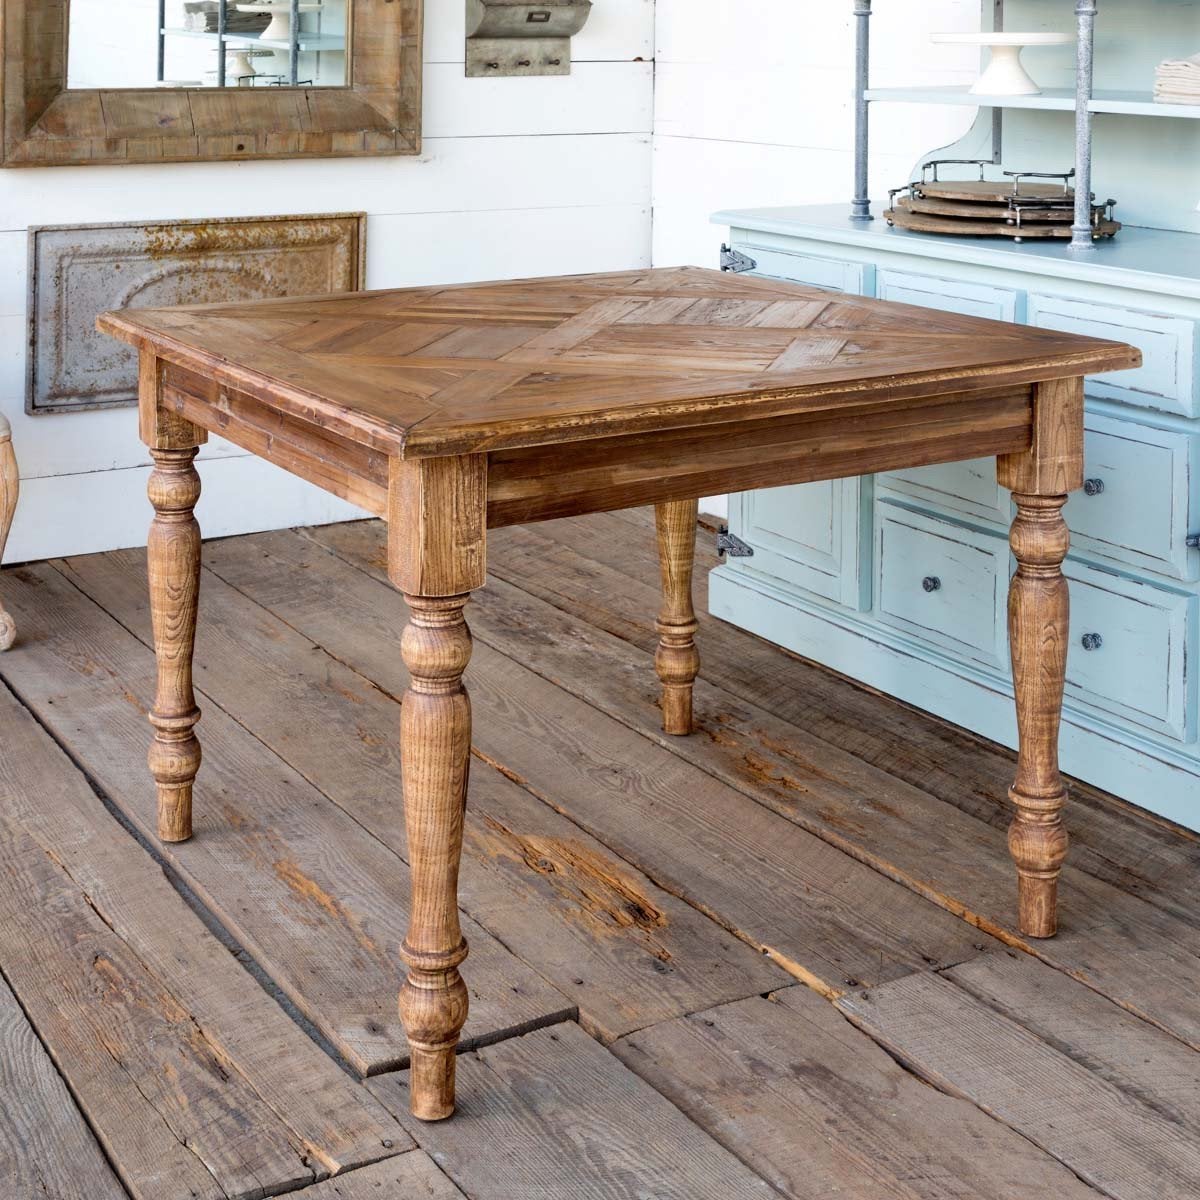 How to Clean Antique Wood Furniture: A Step-by-Step Guide